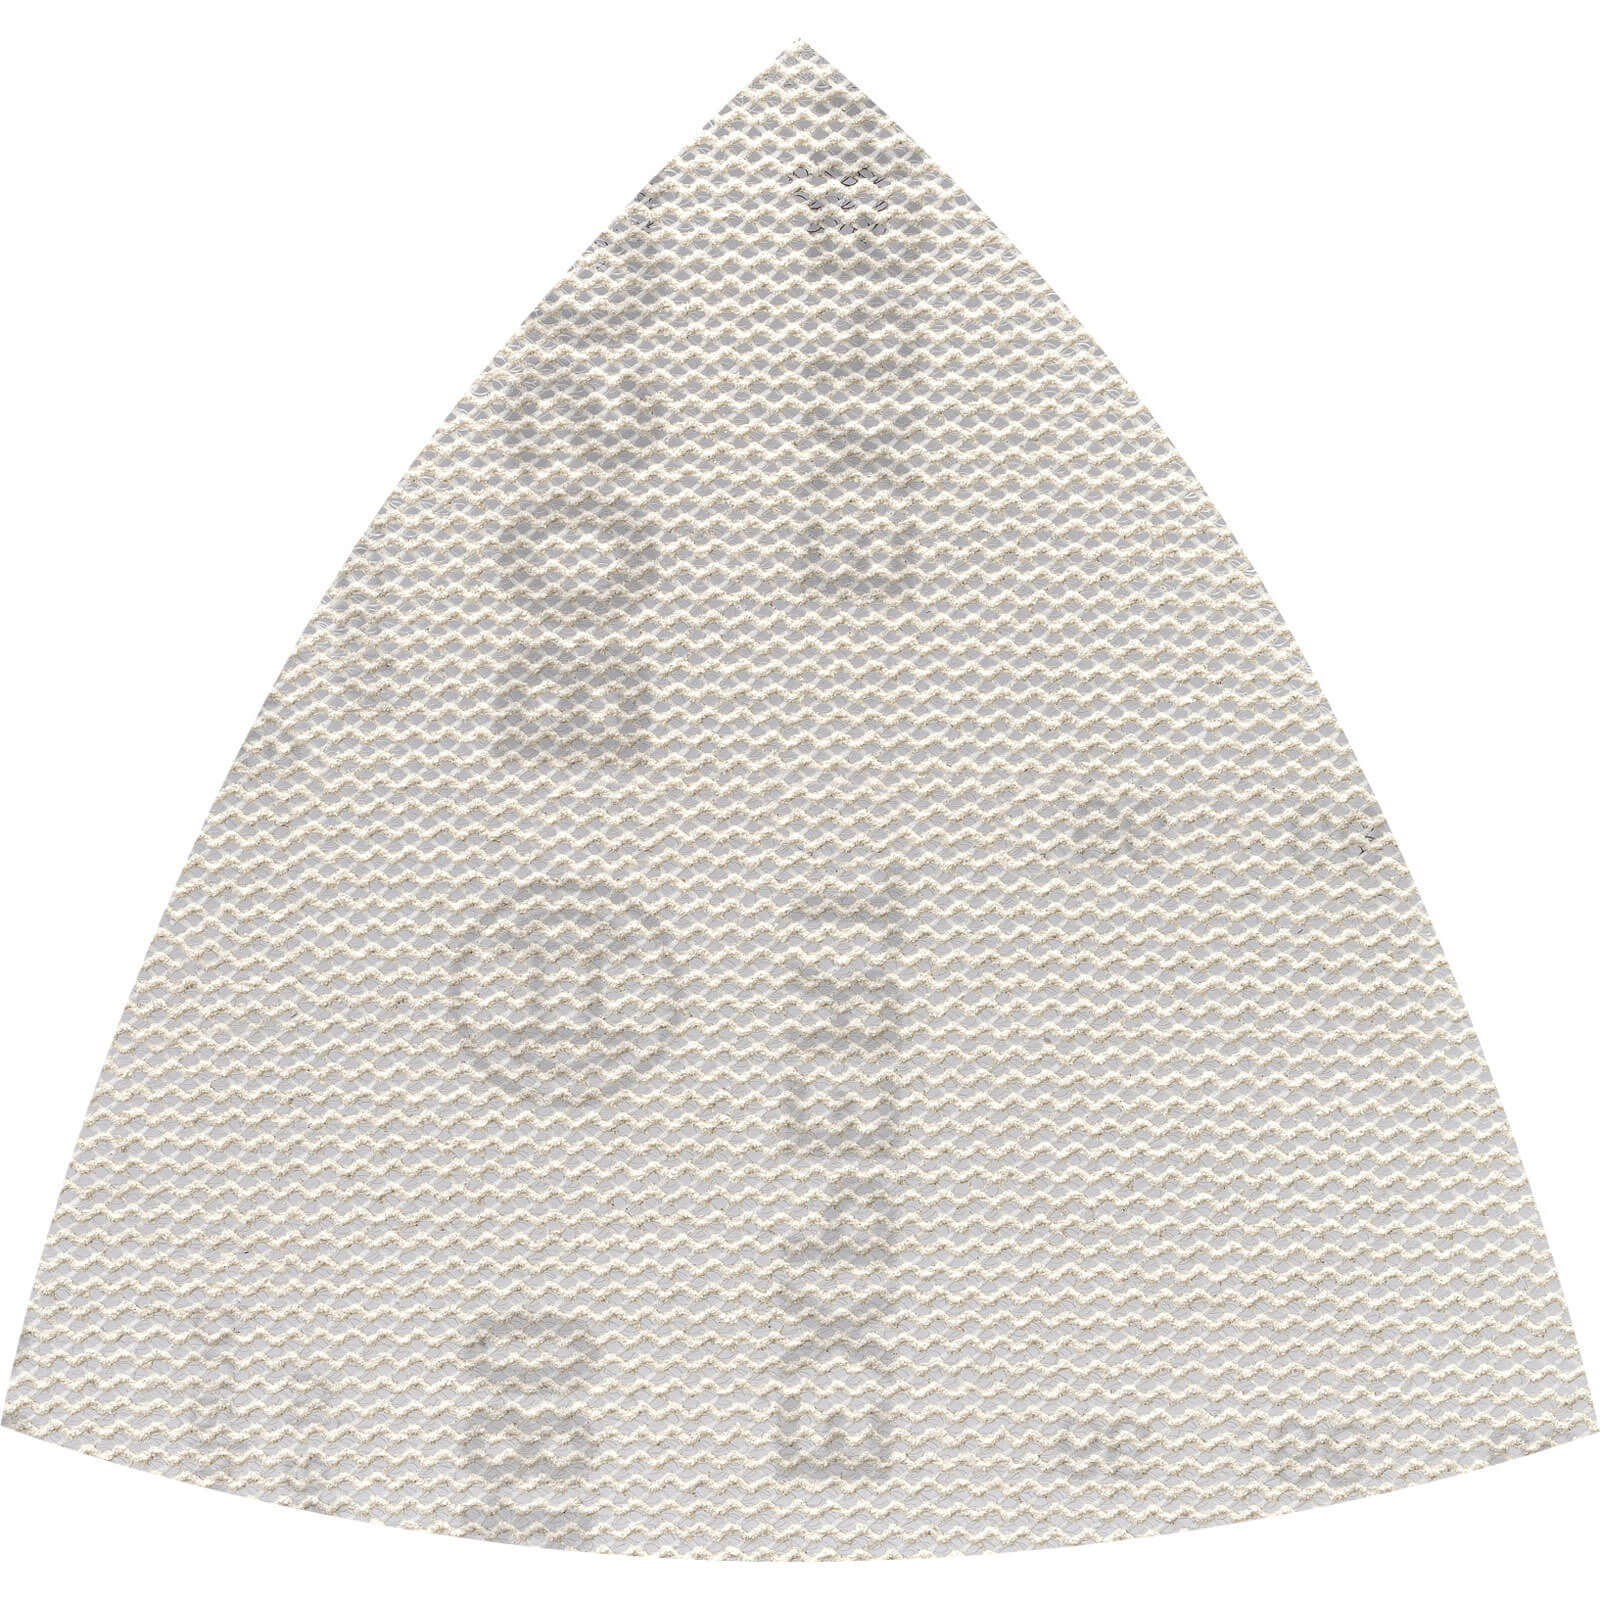 Bosch Expert M480 Quick Fit Net Delta Sanding Sheets for Paint and Wood 93mm x 93mm 240g Pack of 5